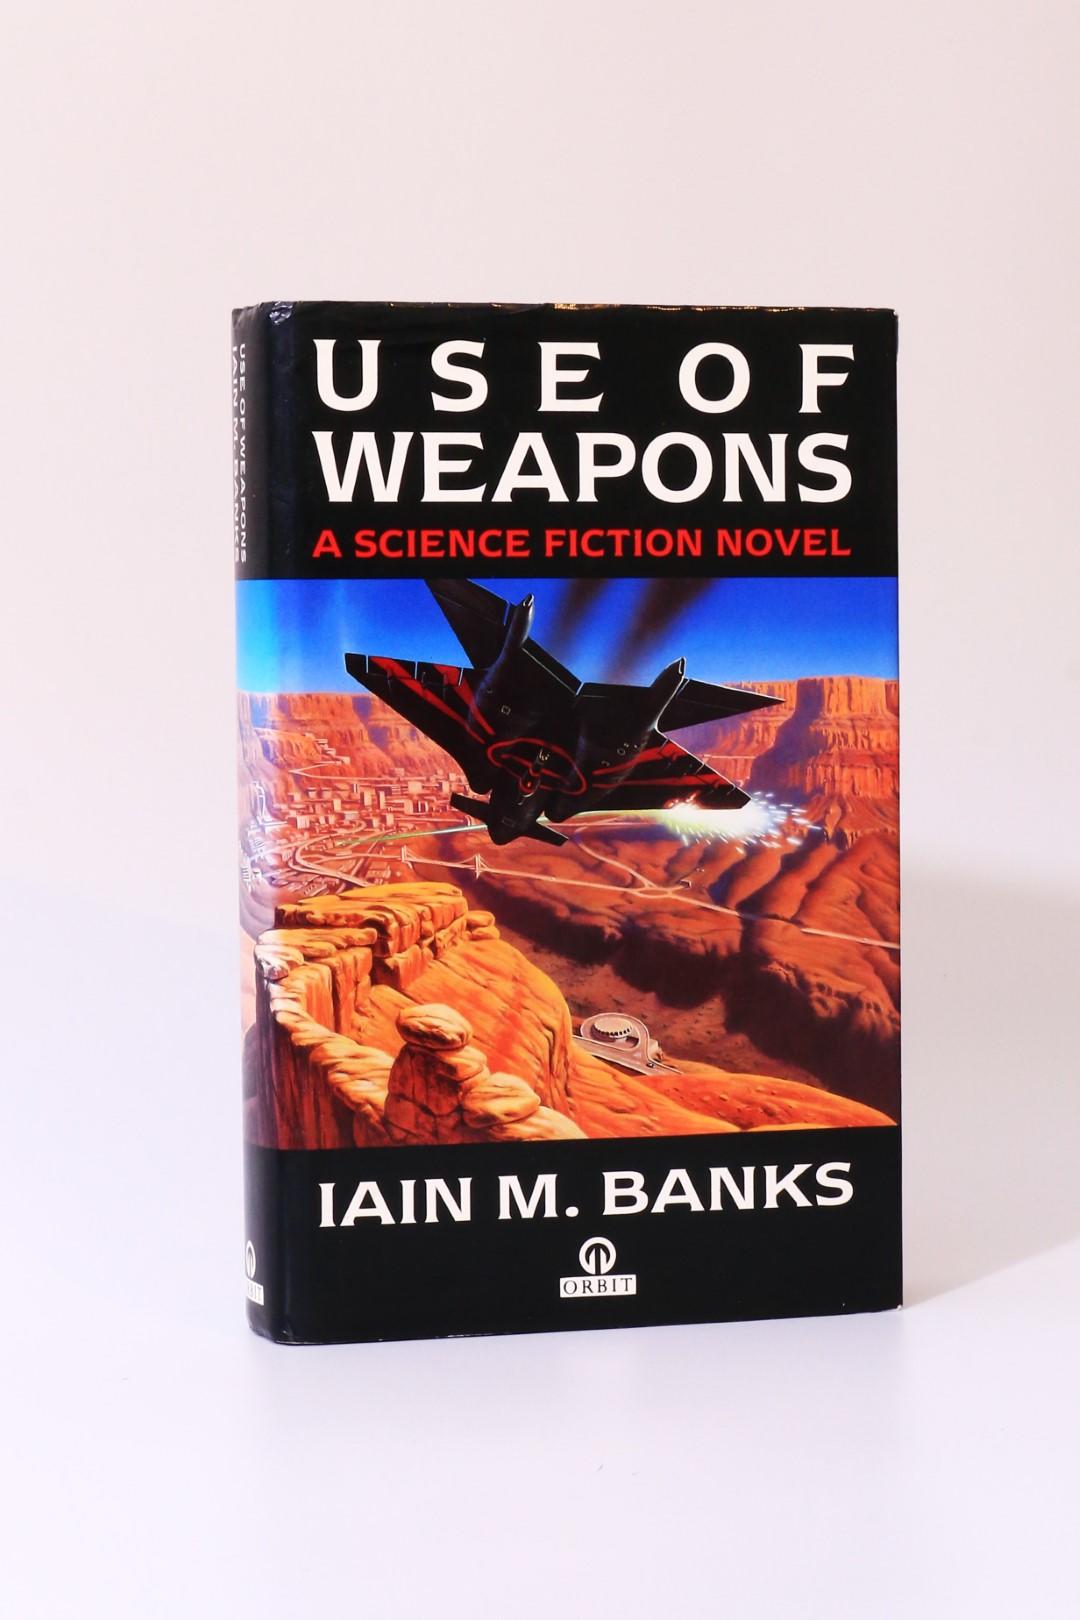 Iain M. Banks - Use of Weapons - Orbit, 1990, First Edition.